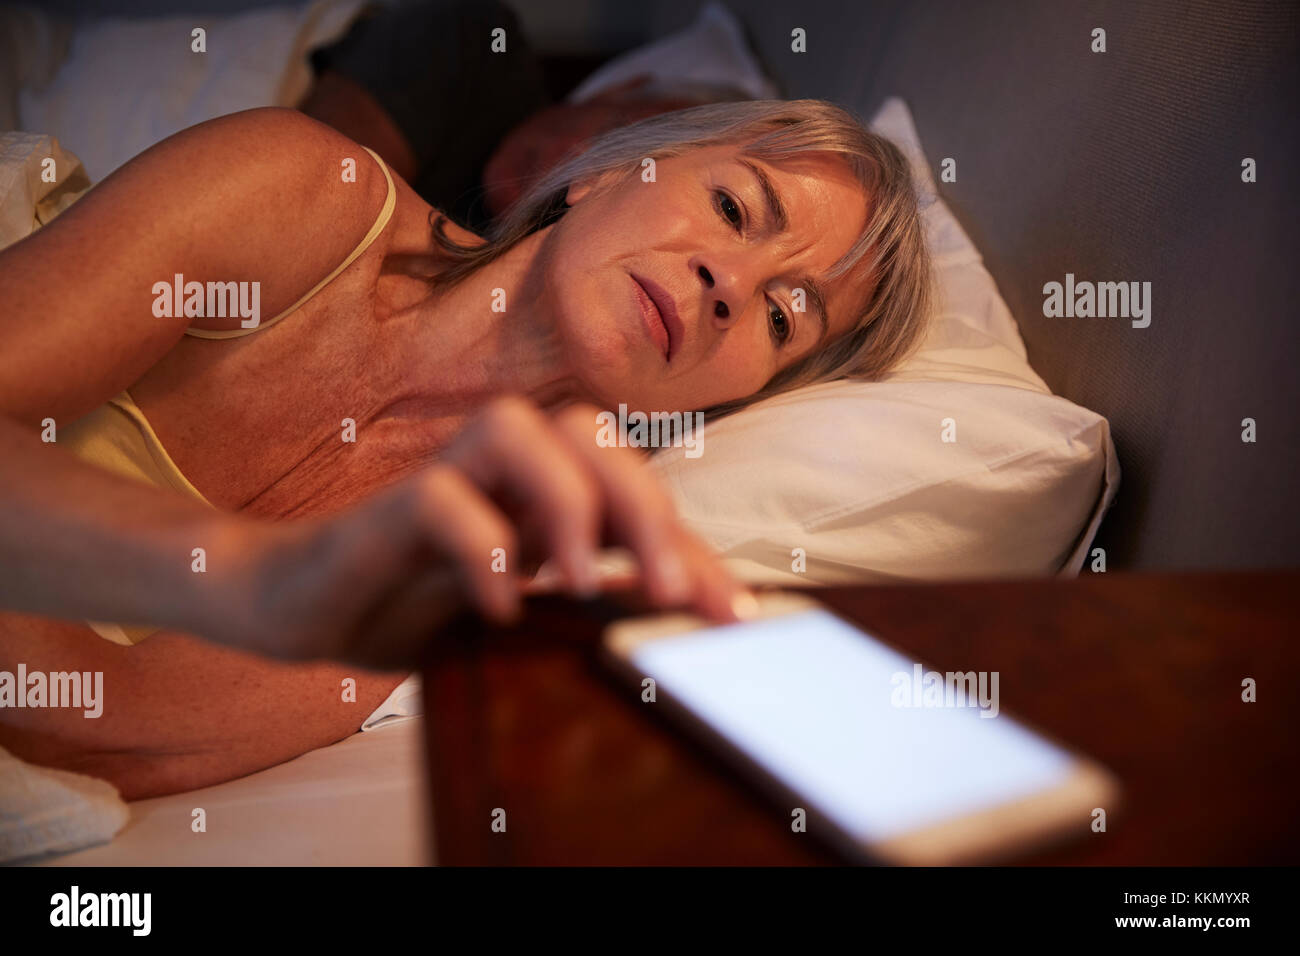 Sleepless Senior Woman In Bed At Night Checking Mobile Phone Stock Photo